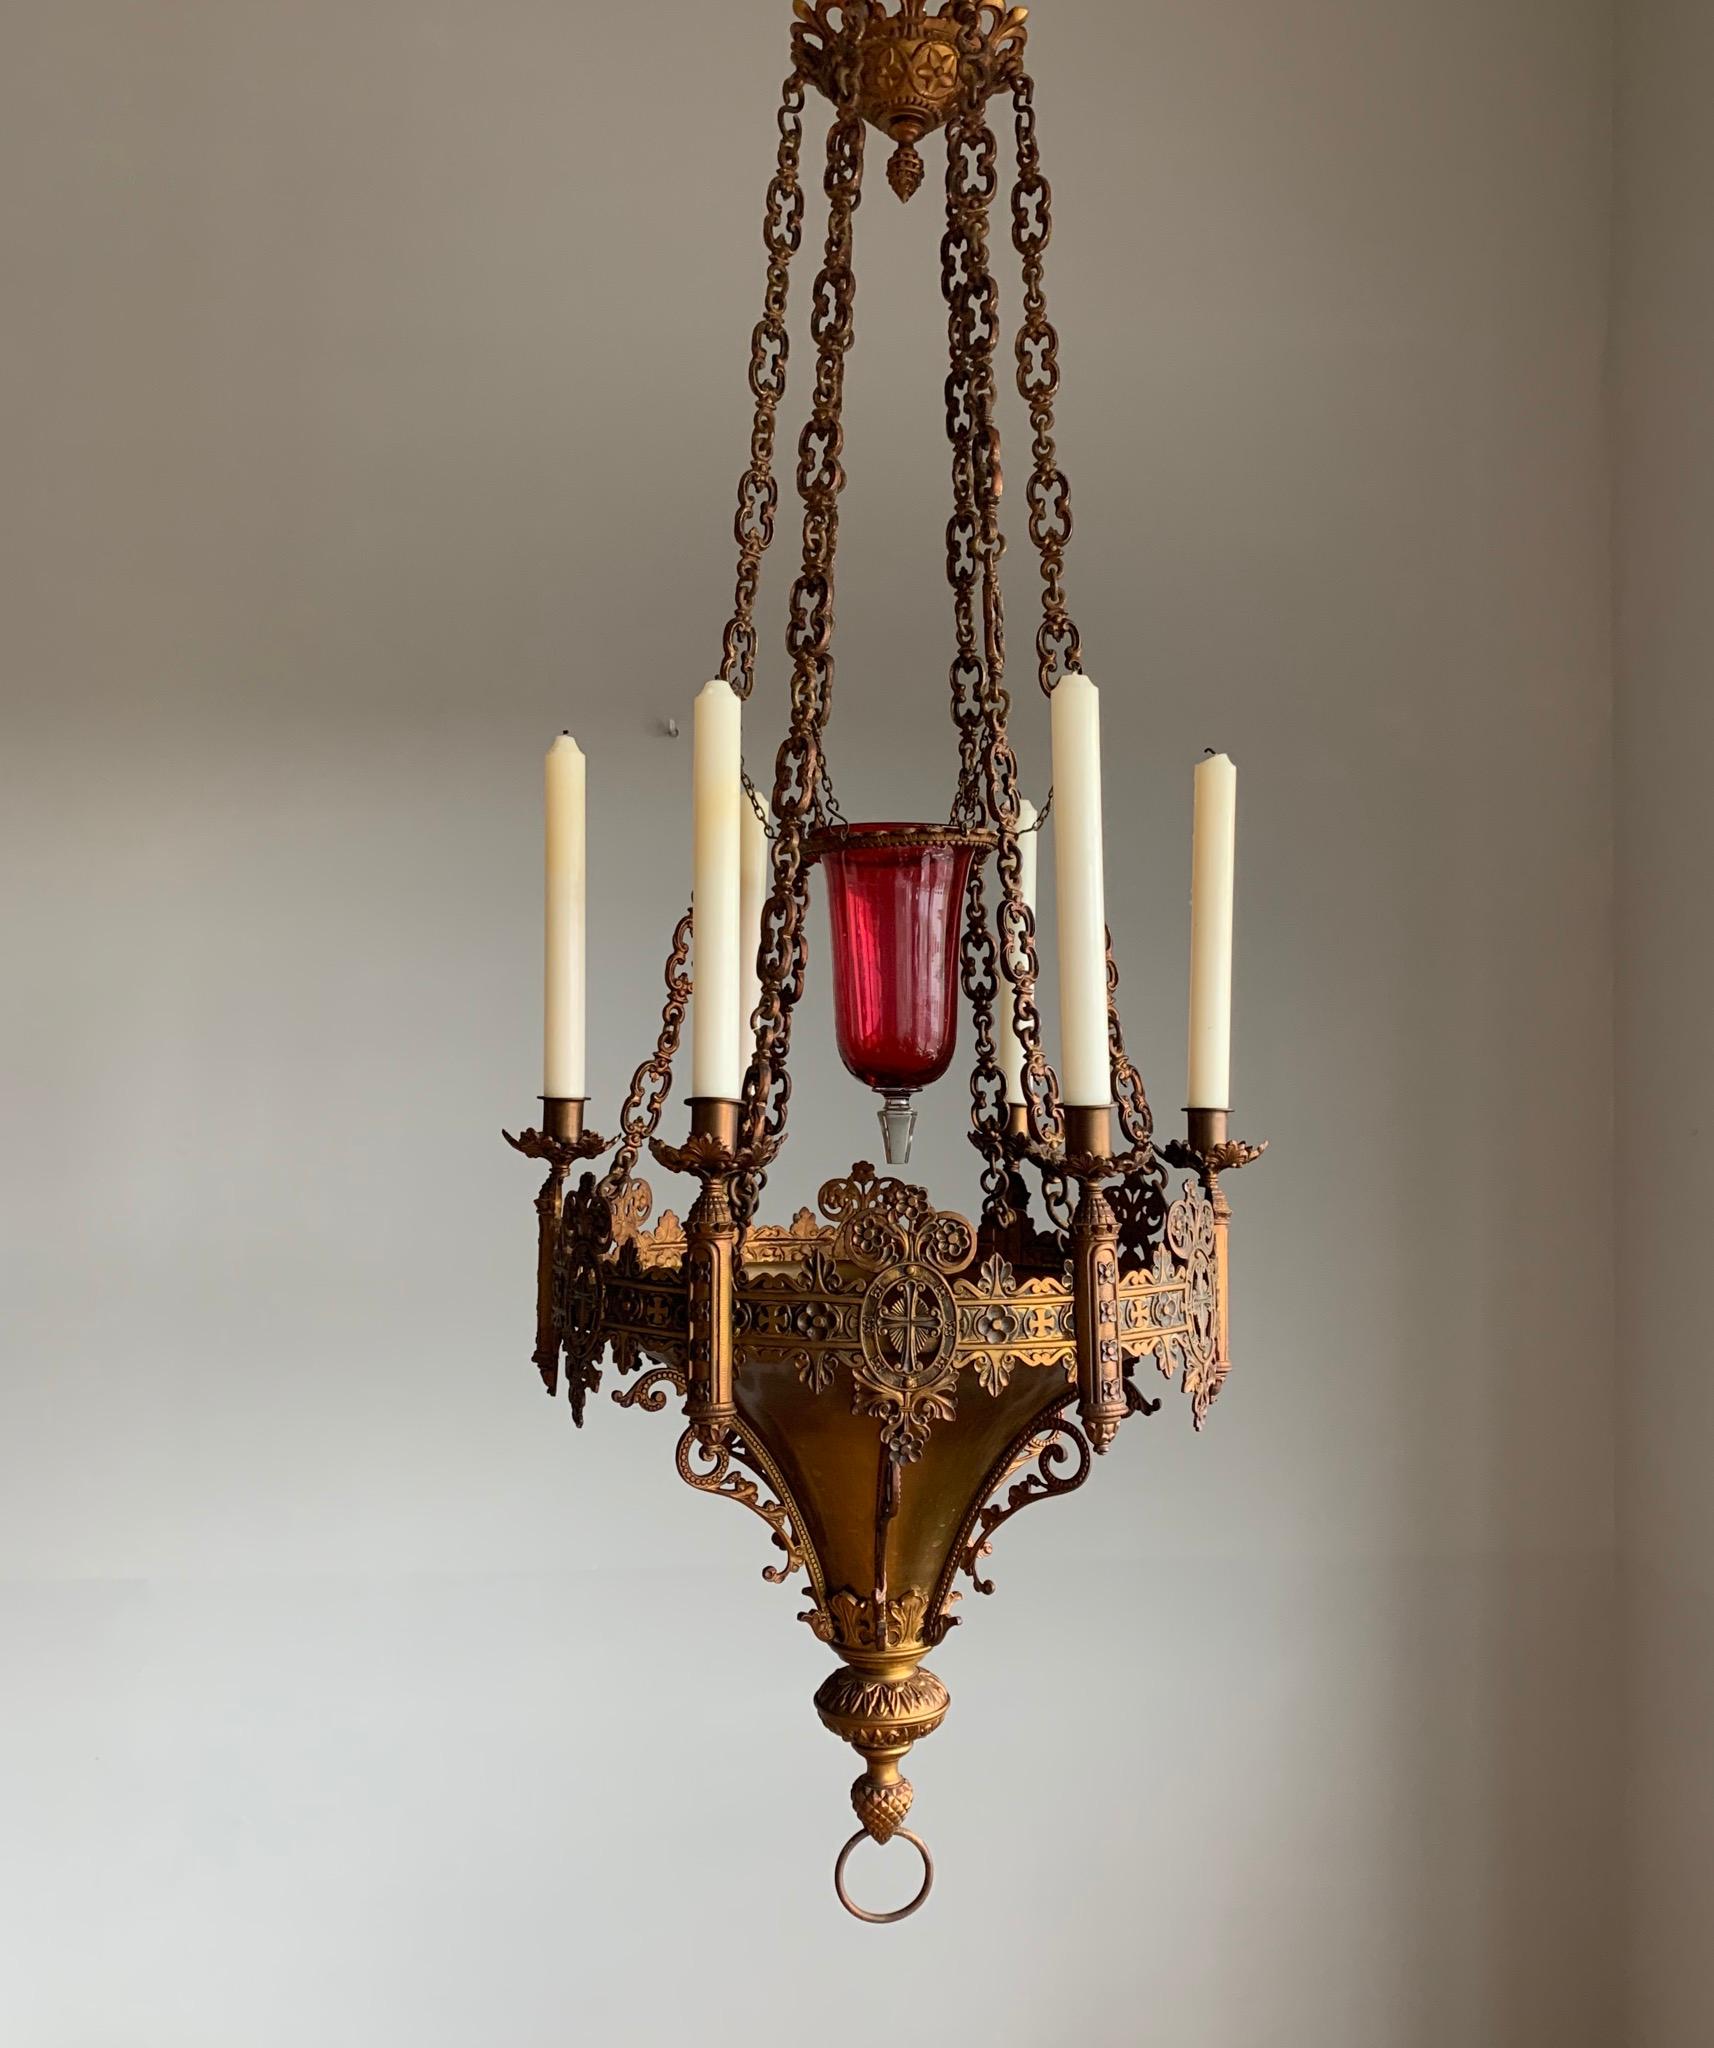 Stunning and all handcrafted church sanctuary light with glass vessel in the center.

If you have a Gothic style interior or if you run a church or monastery then this six candles chandelier will look great wherever you decide to hang it. This